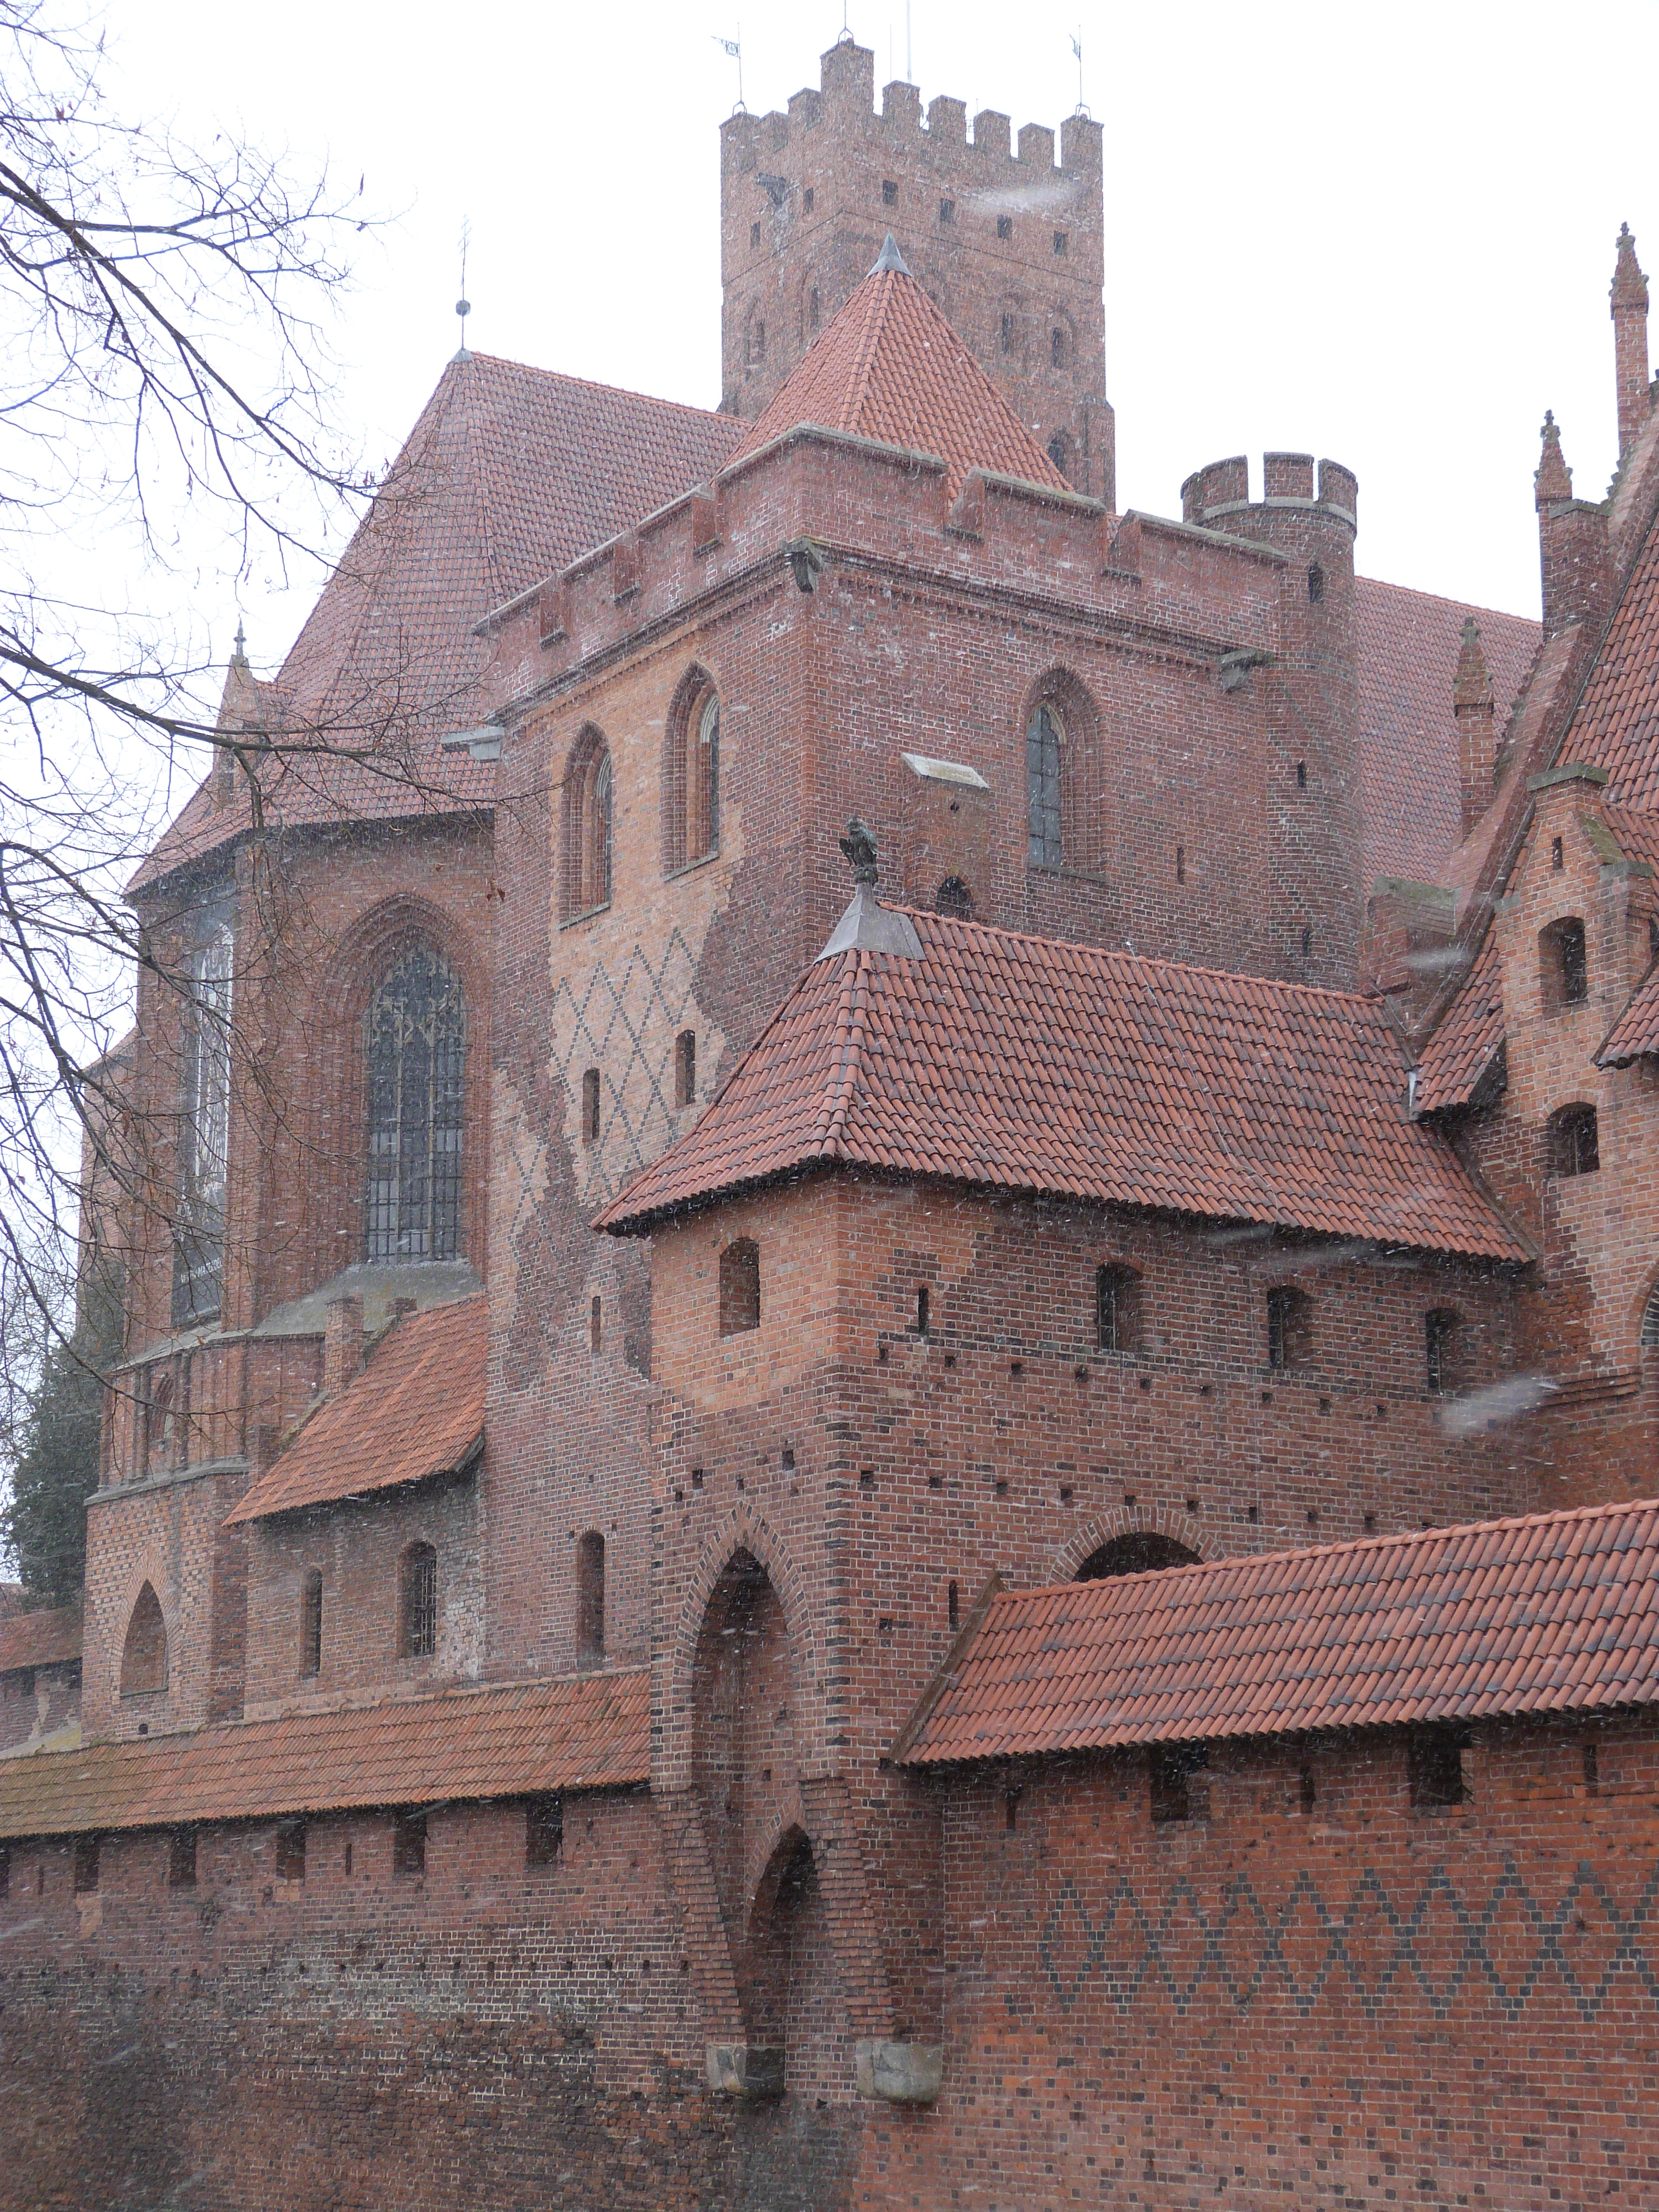 Malbork castle - and its many cupboards